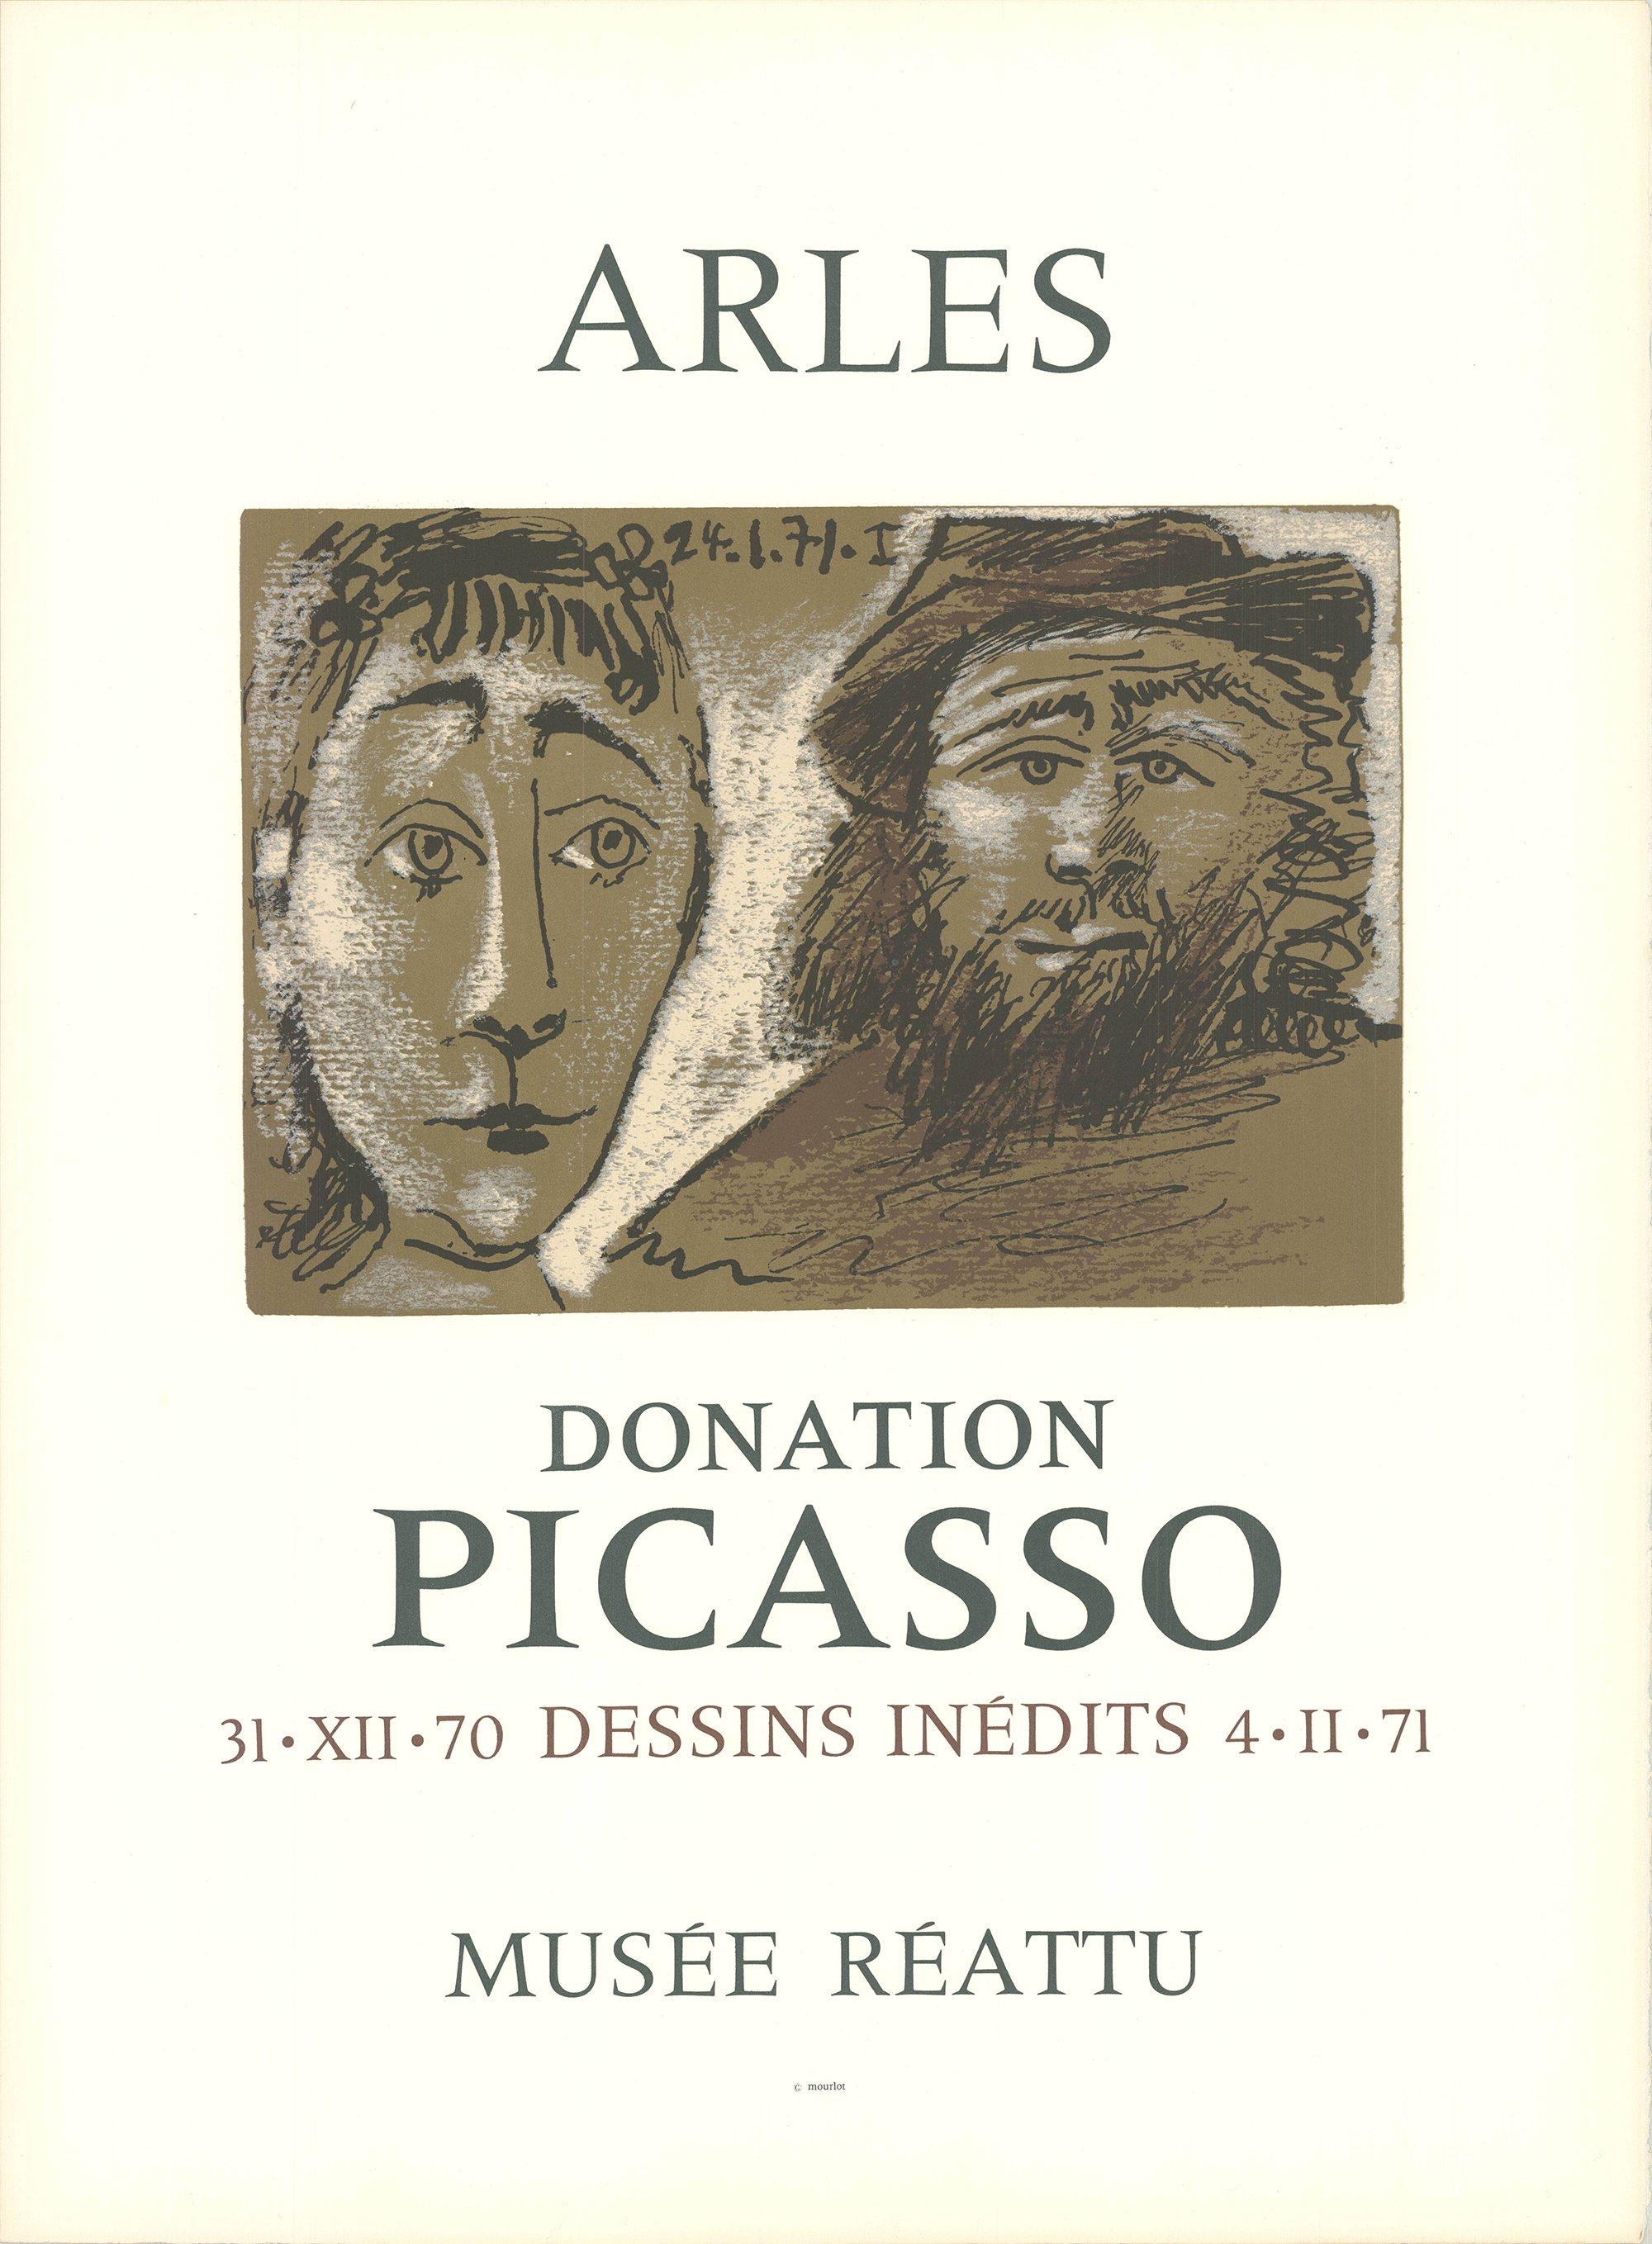 1971 After Pablo Picasso 'Arles' Stone Lithograph